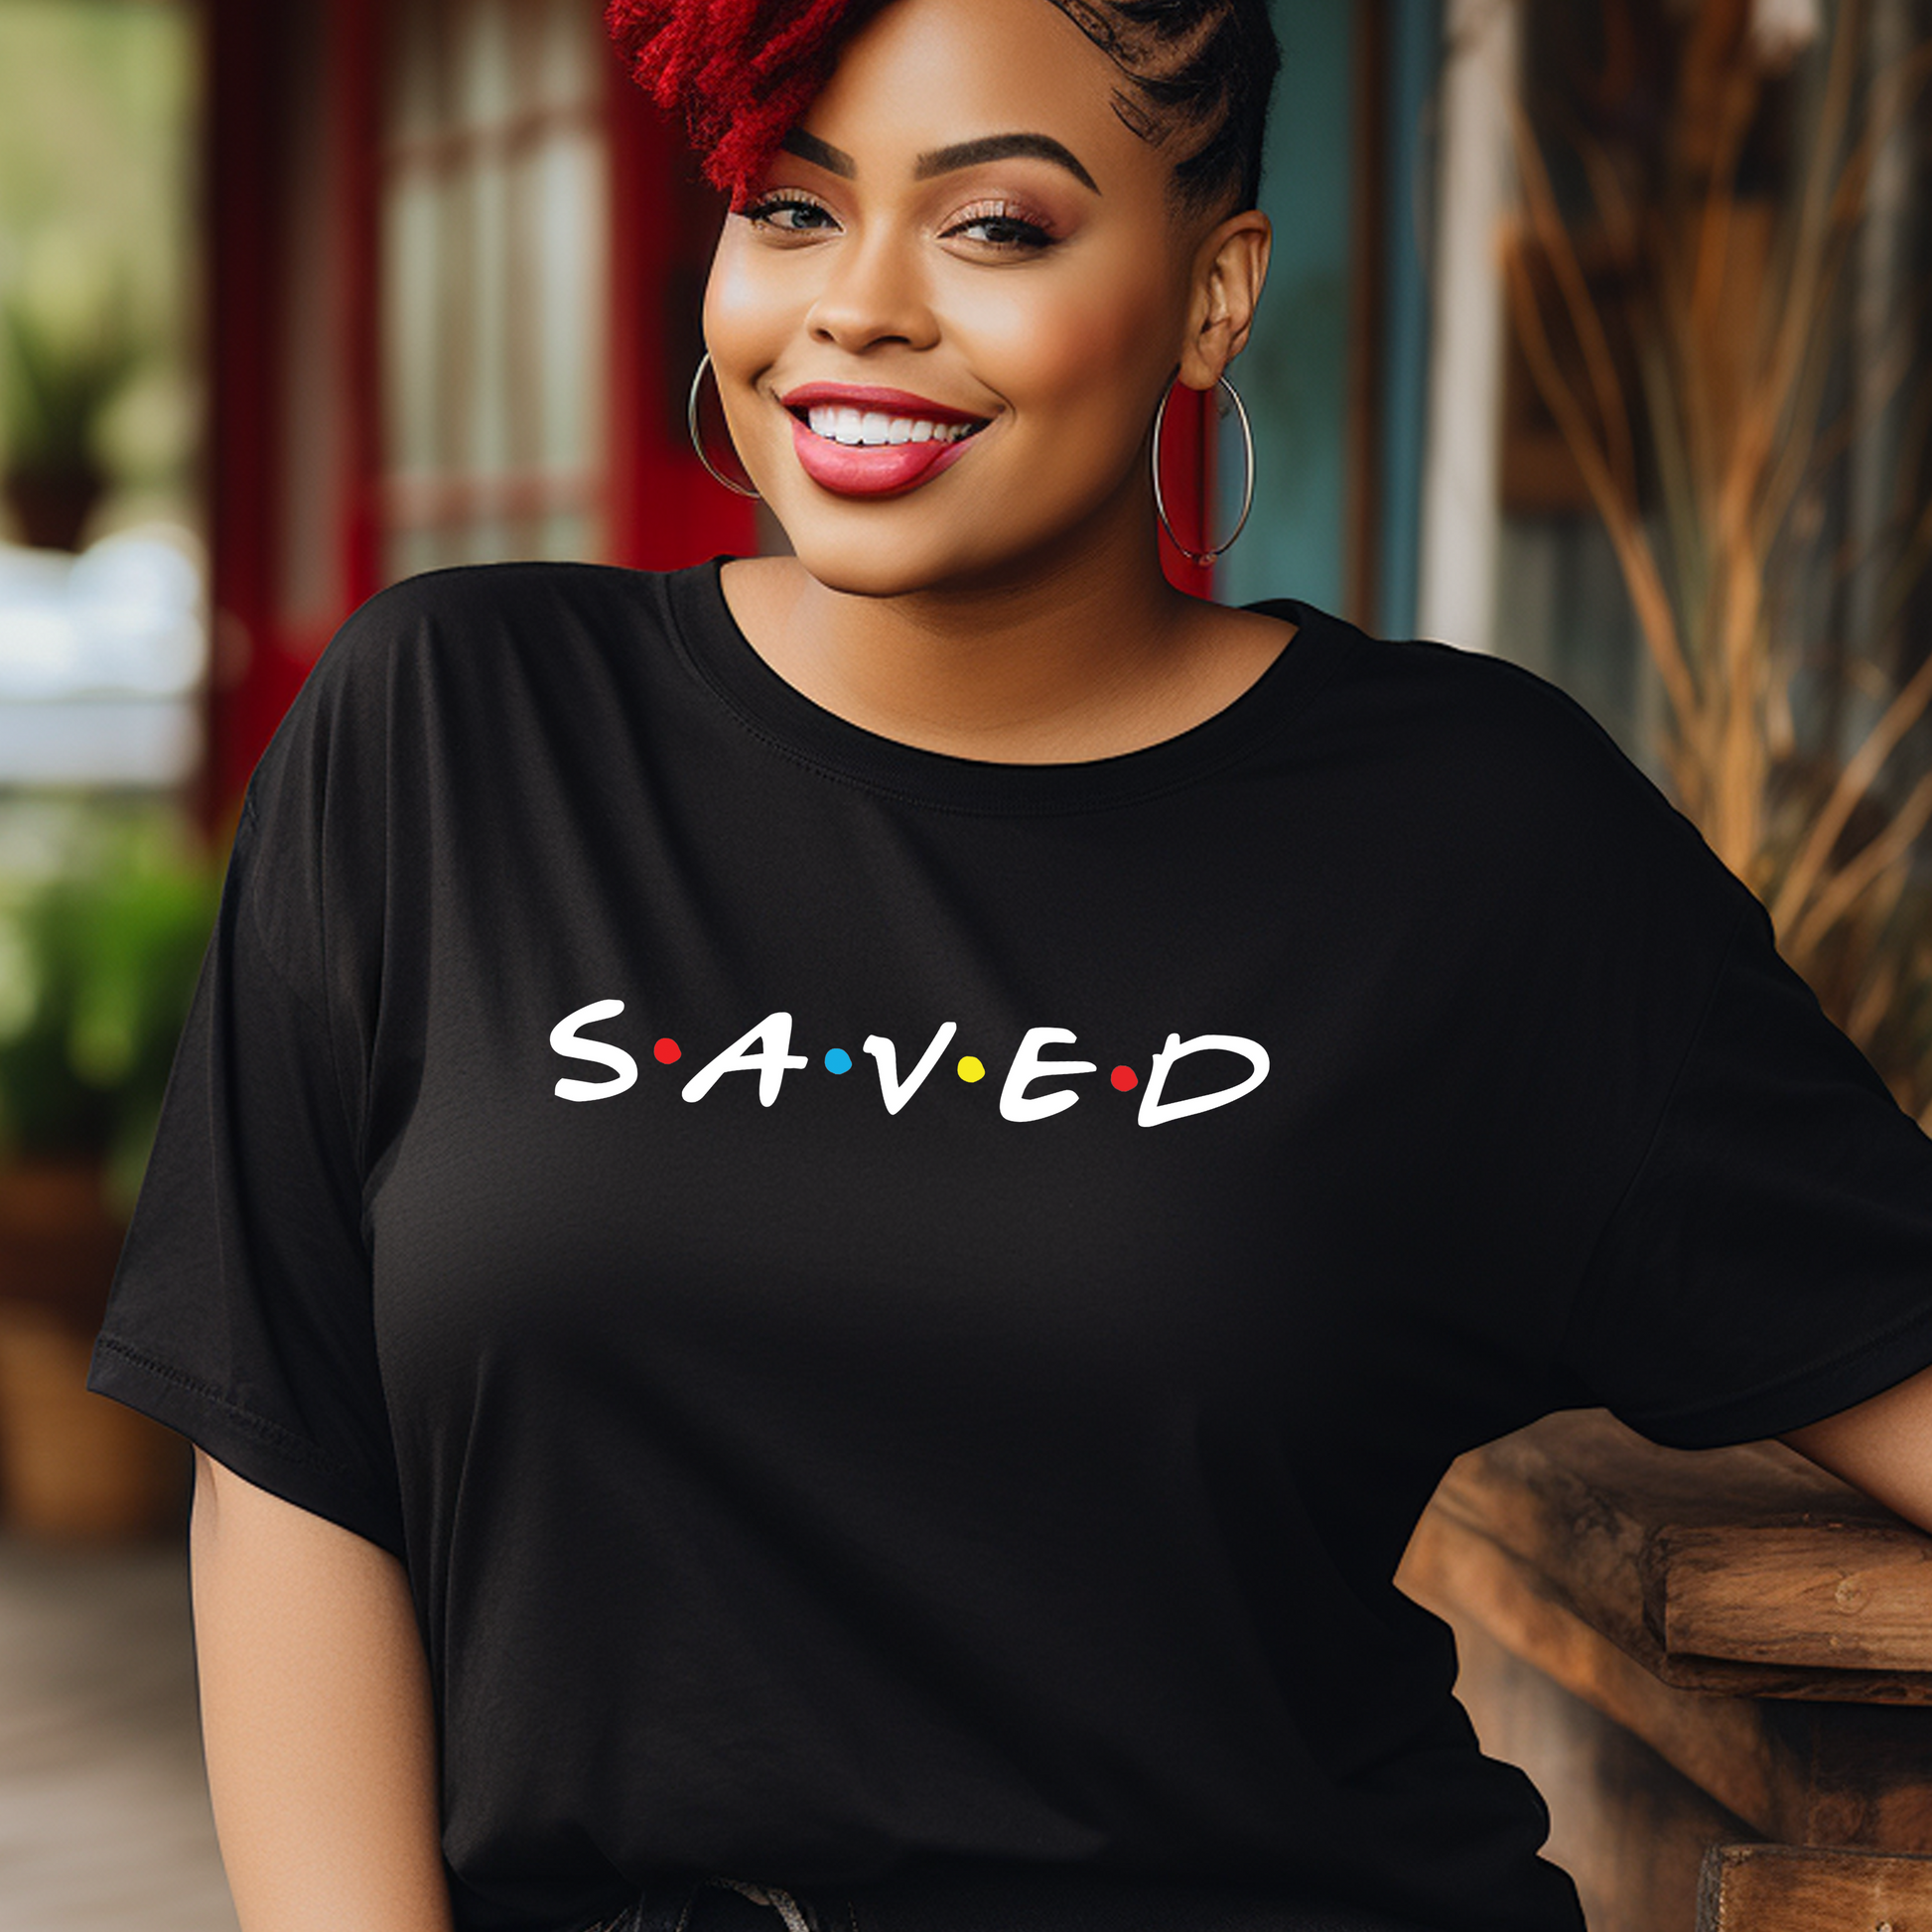 Stylish black 'Saved' t-shirt at Triumph Tees, representing salvation and faith. This God-inspired apparel item is a bold testament of religious conviction.